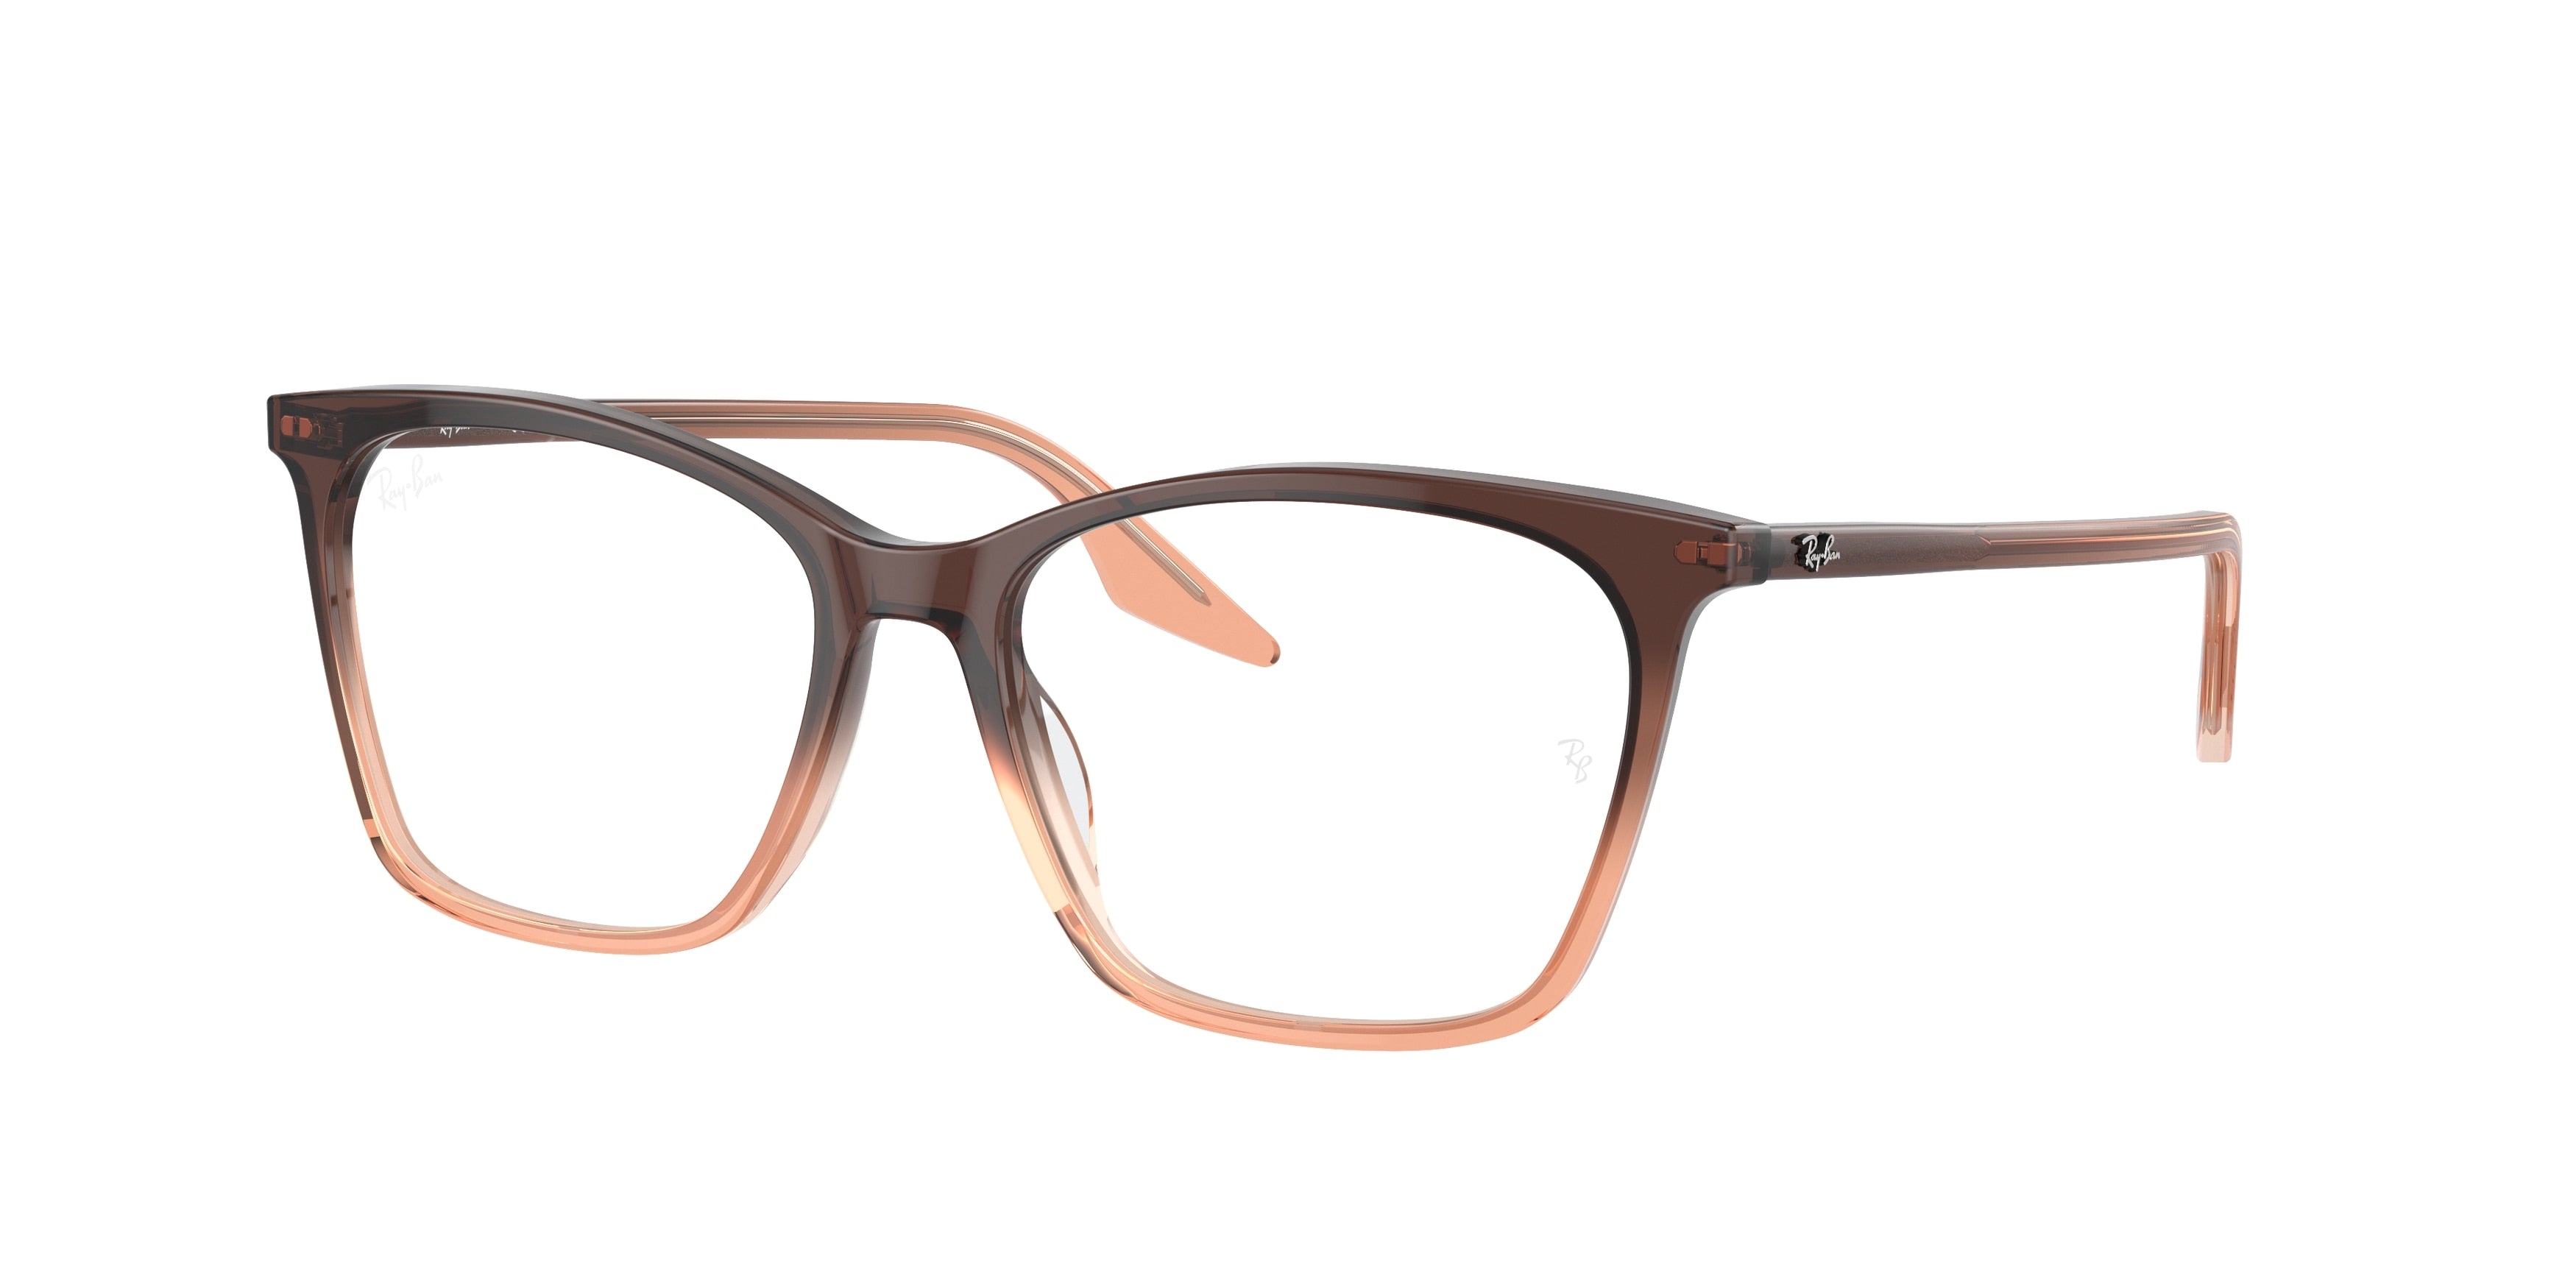 Ray-Ban Optical RX5422 Cat Eye Eyeglasses  8312-Brown & Orange 54-145-16 - Color Map Clear